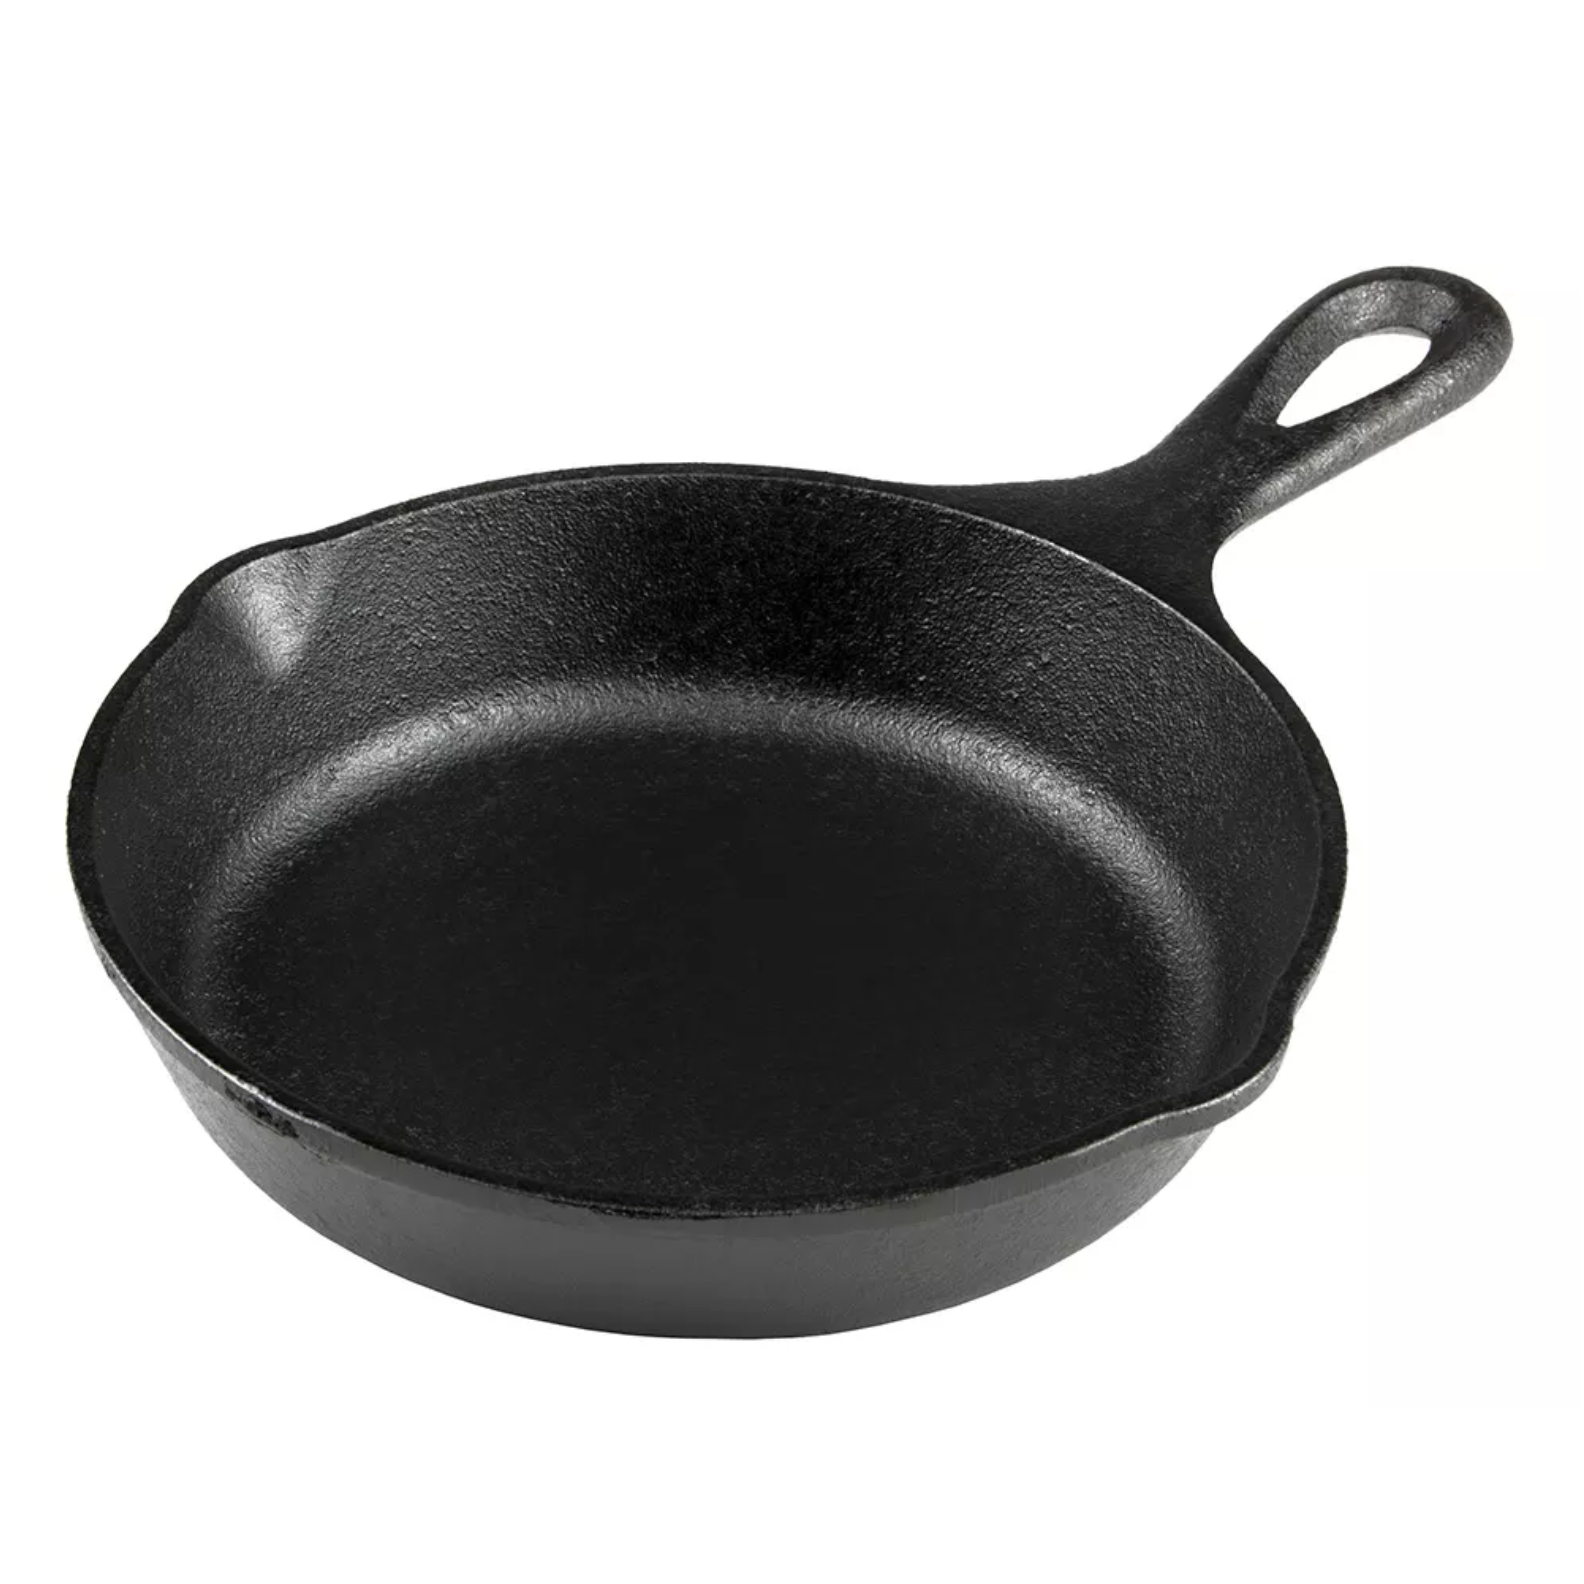 Lodge Seasoned Cast Iron Cookware Set 2 Piece Skillet Set 10.25 in & 6.5 in